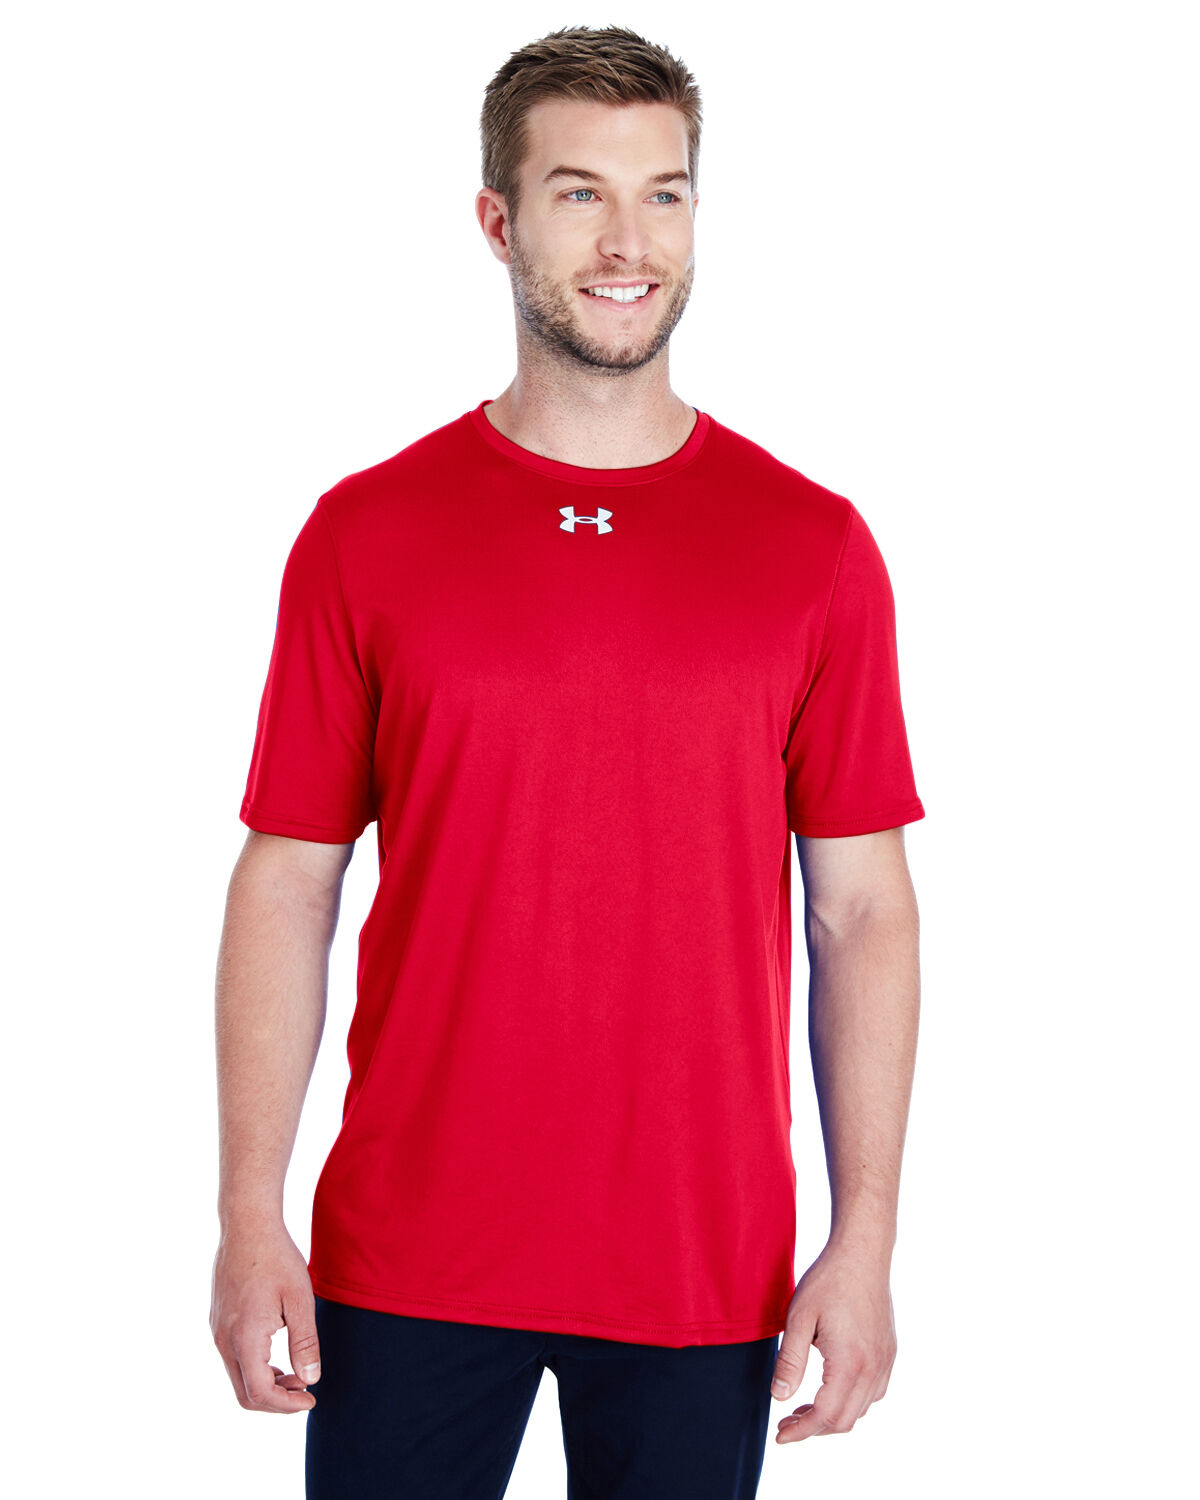 Custom Branded Under Armour T-Shirts